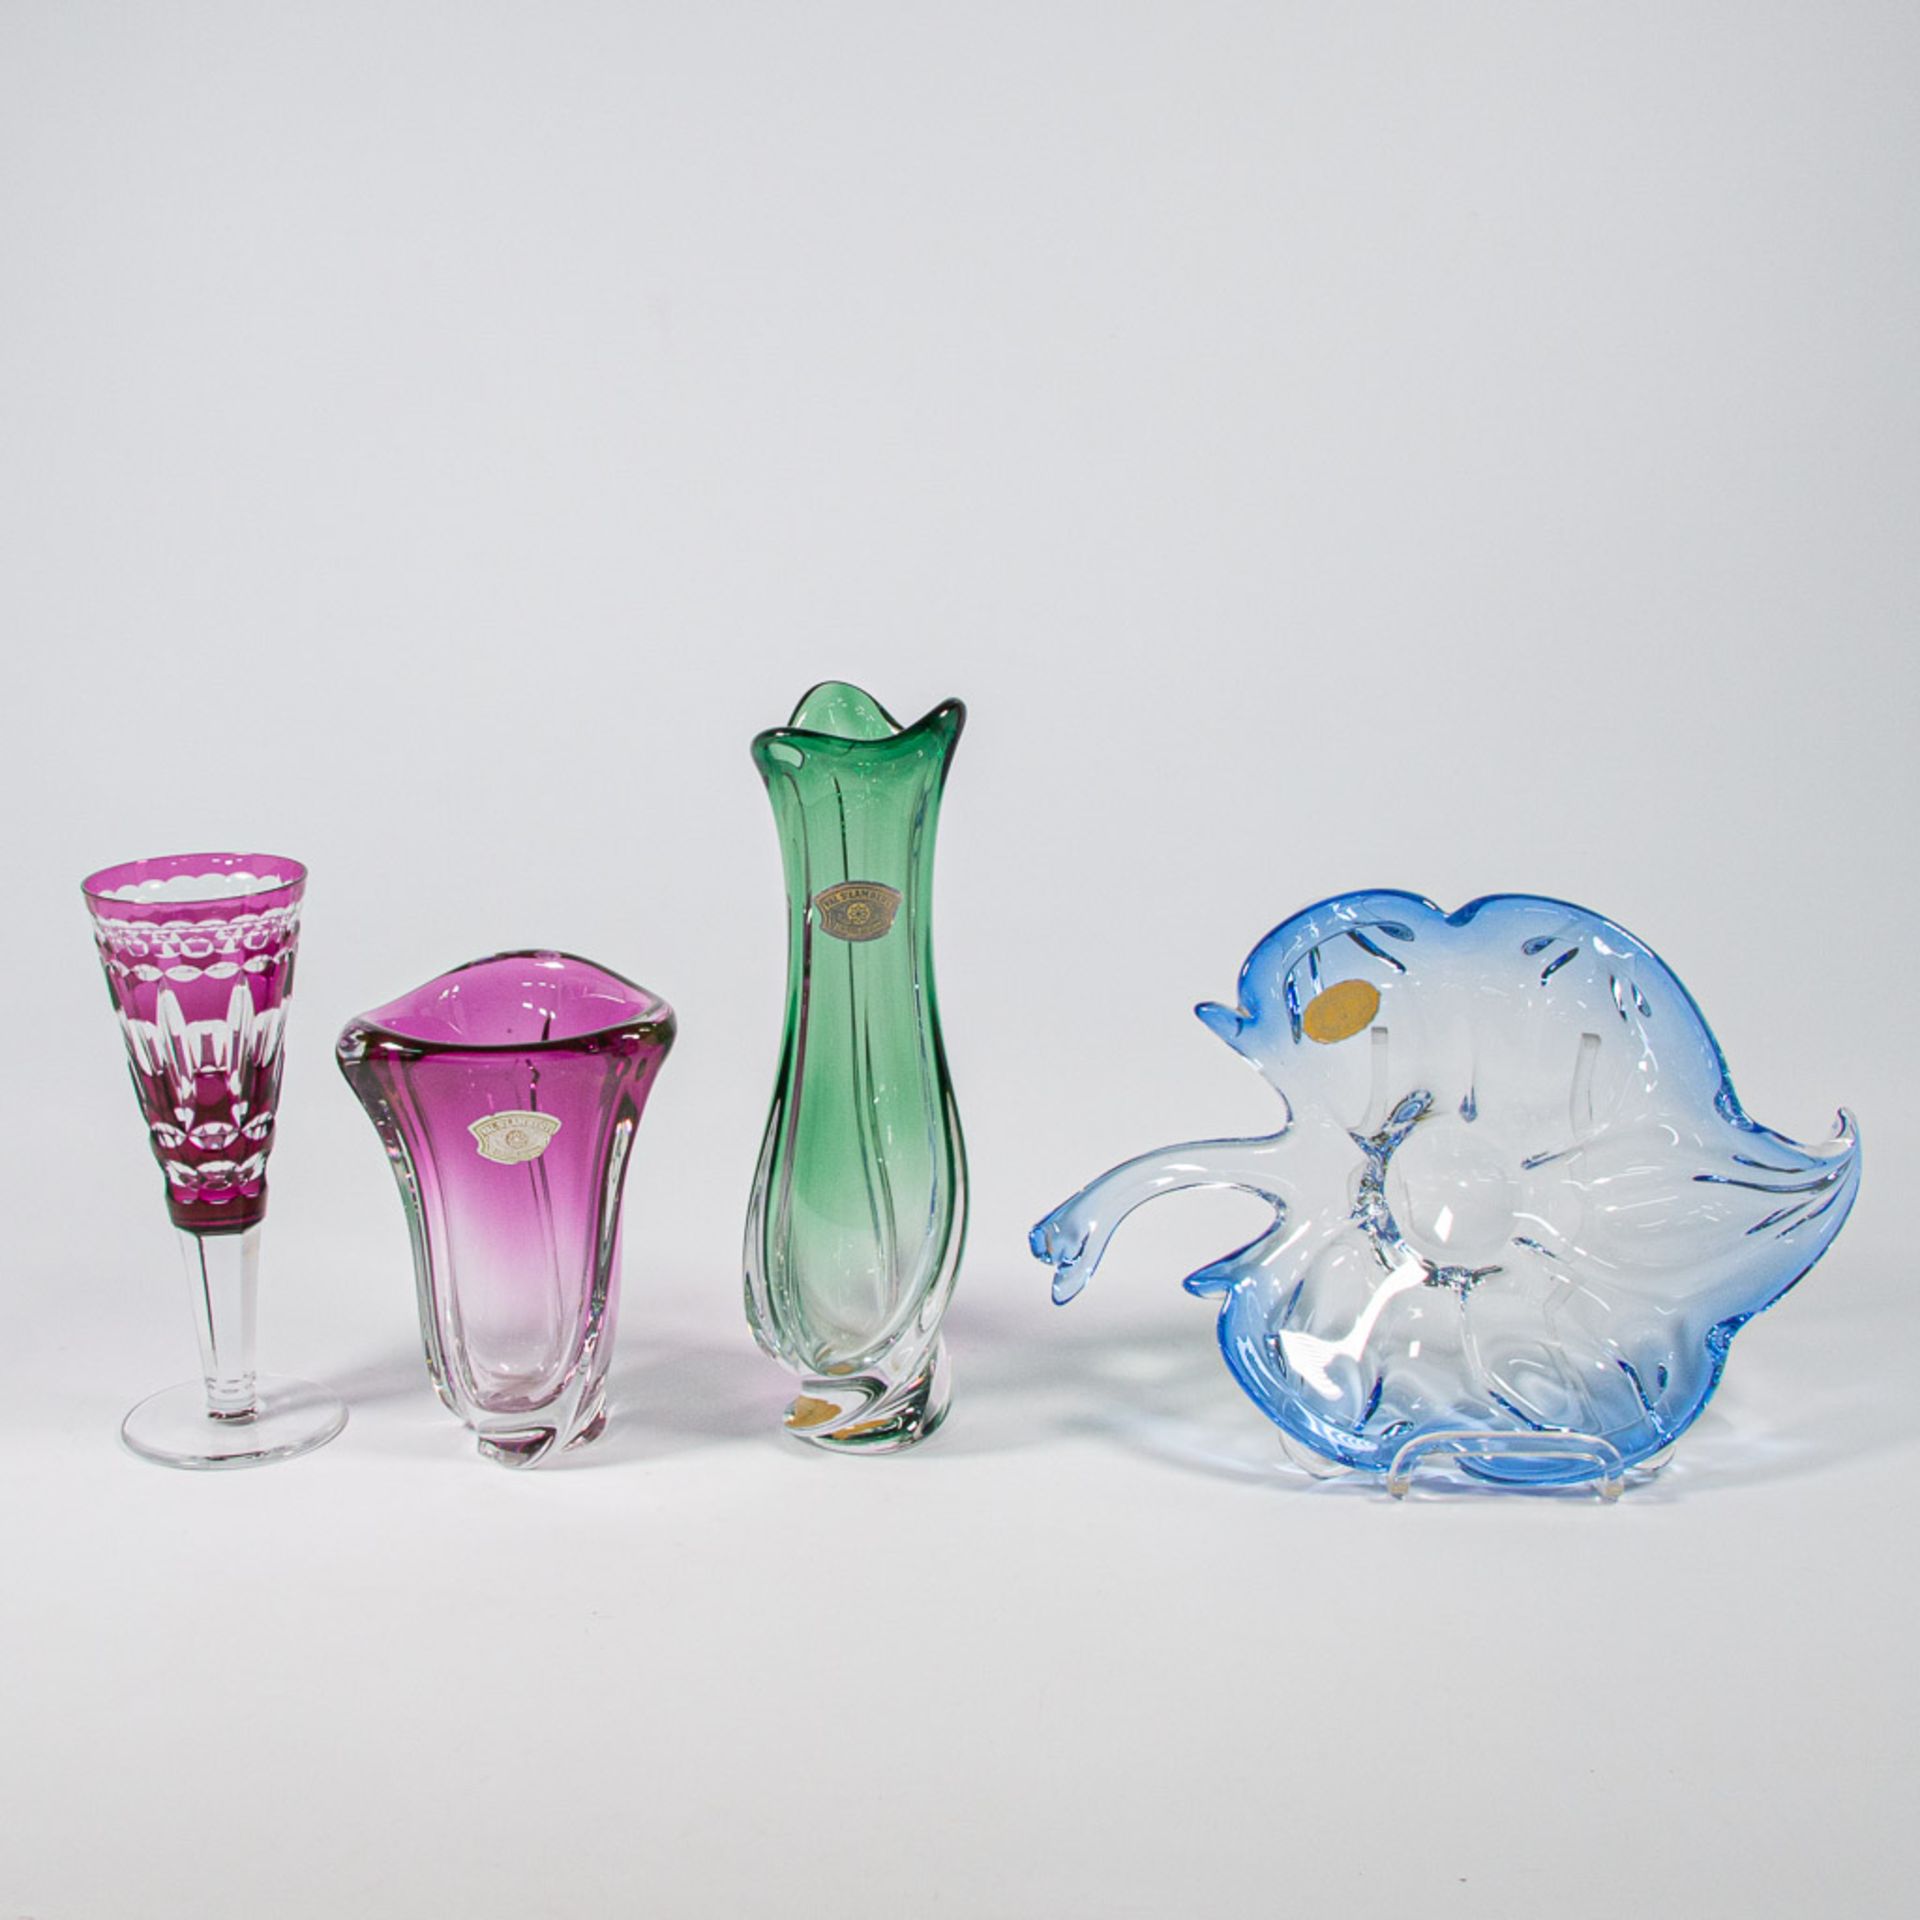 A collection of 3 crystal Val Saint Lambert vases, and 1 plate Braine Le Comte.